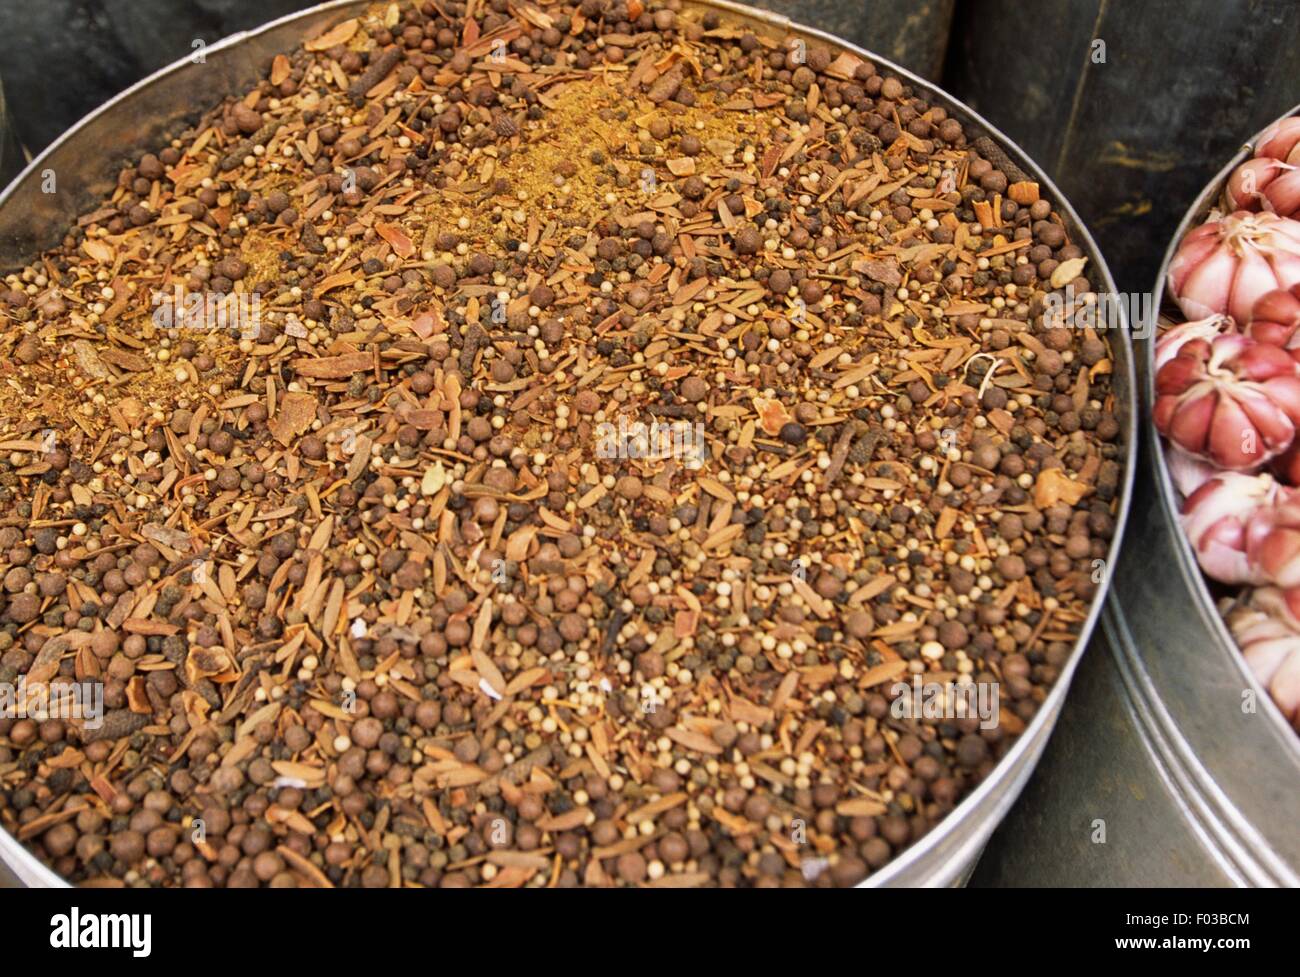 Spices in a shop at a souk, Marrakech, region of Marrakech-Tensift-El Haouz, Morocco. Stock Photo